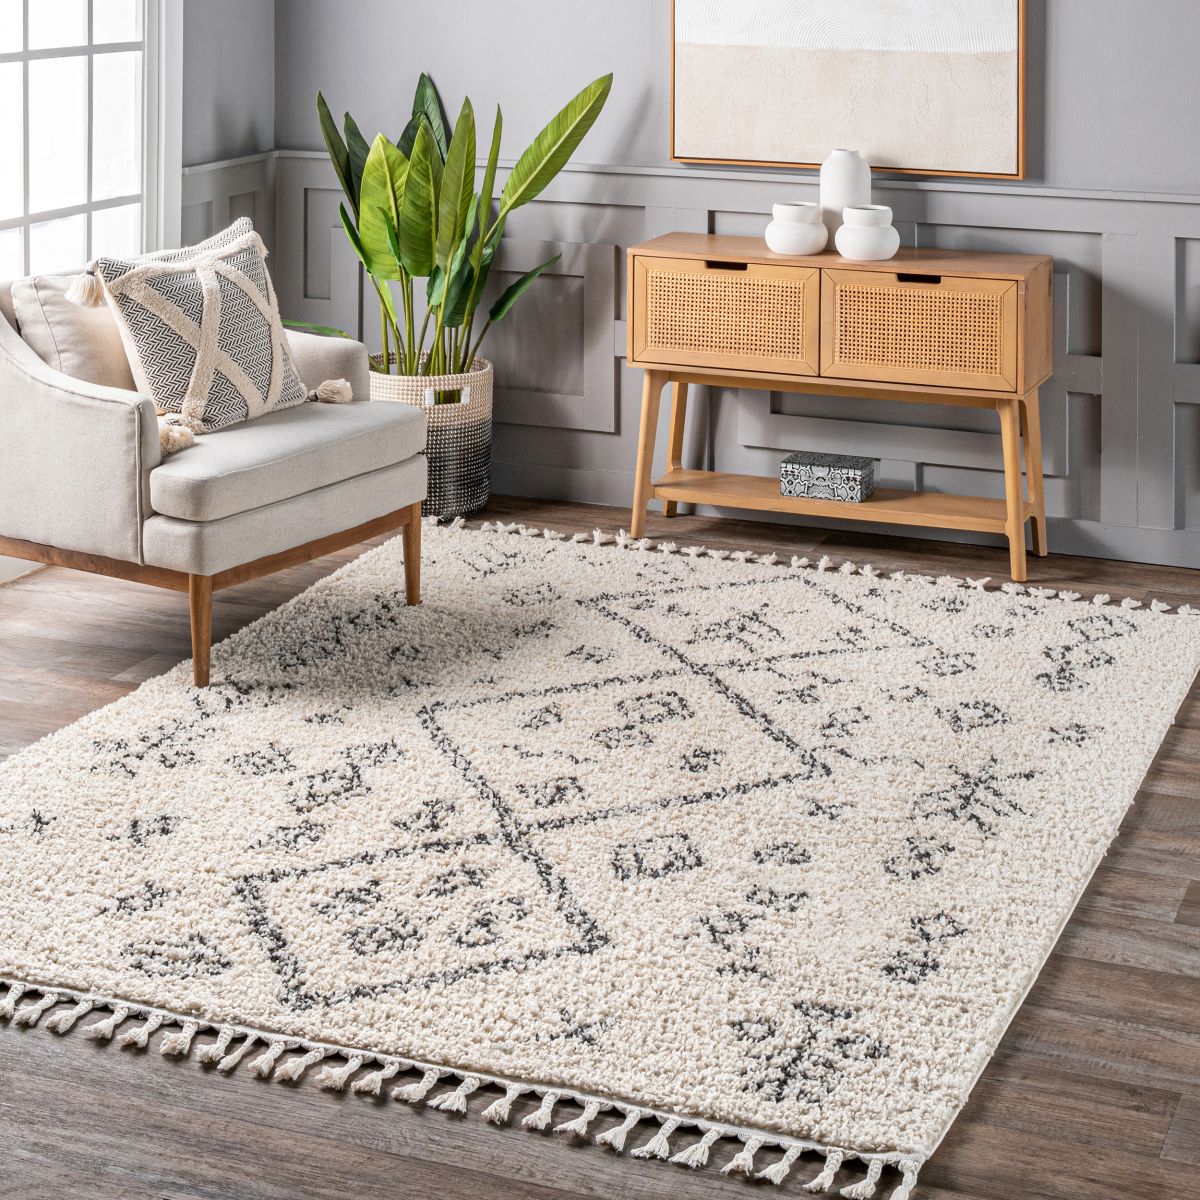 Off White Moroccan Tribal Abstract Tassel 9' 2" x 12' Area Rug | Rugs USA